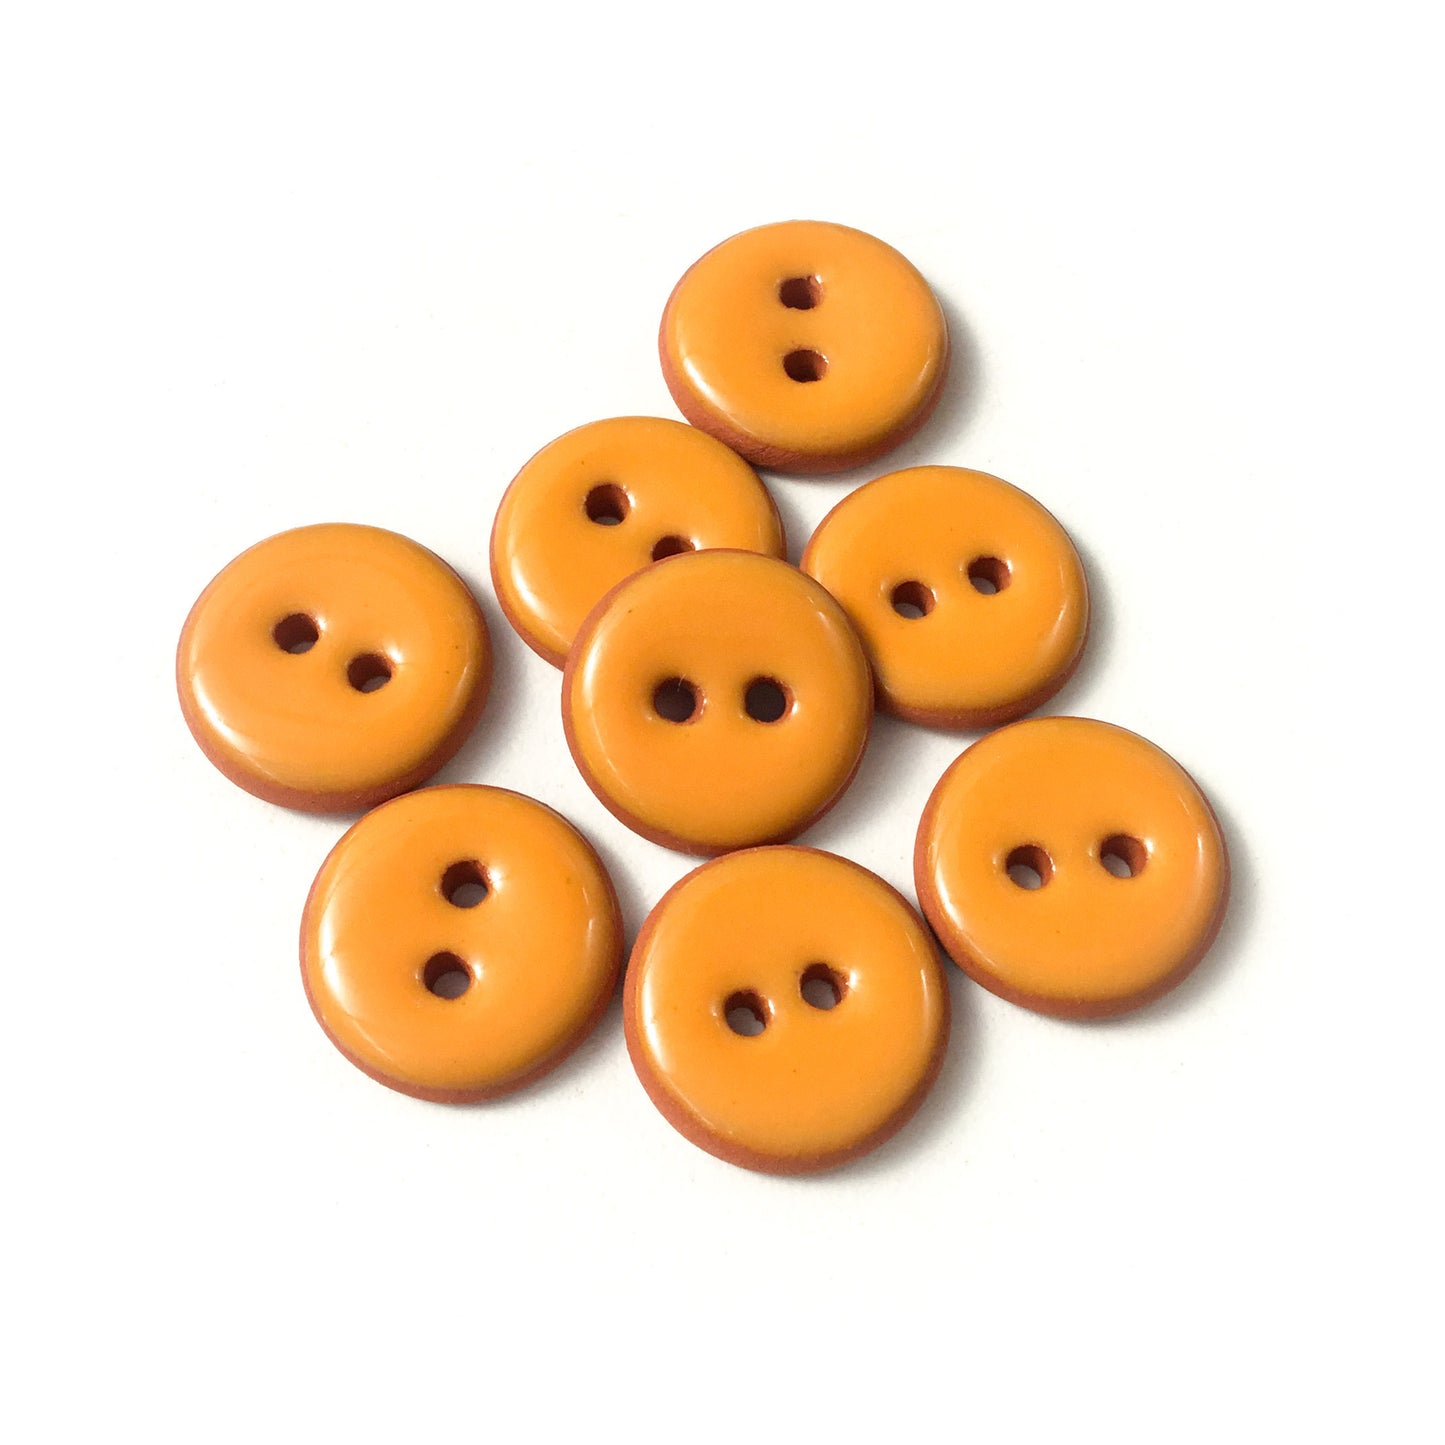 Bright Orange Ceramic Buttons on Red Clay - Round Ceramic Buttons - 11/16" - 8 Pack